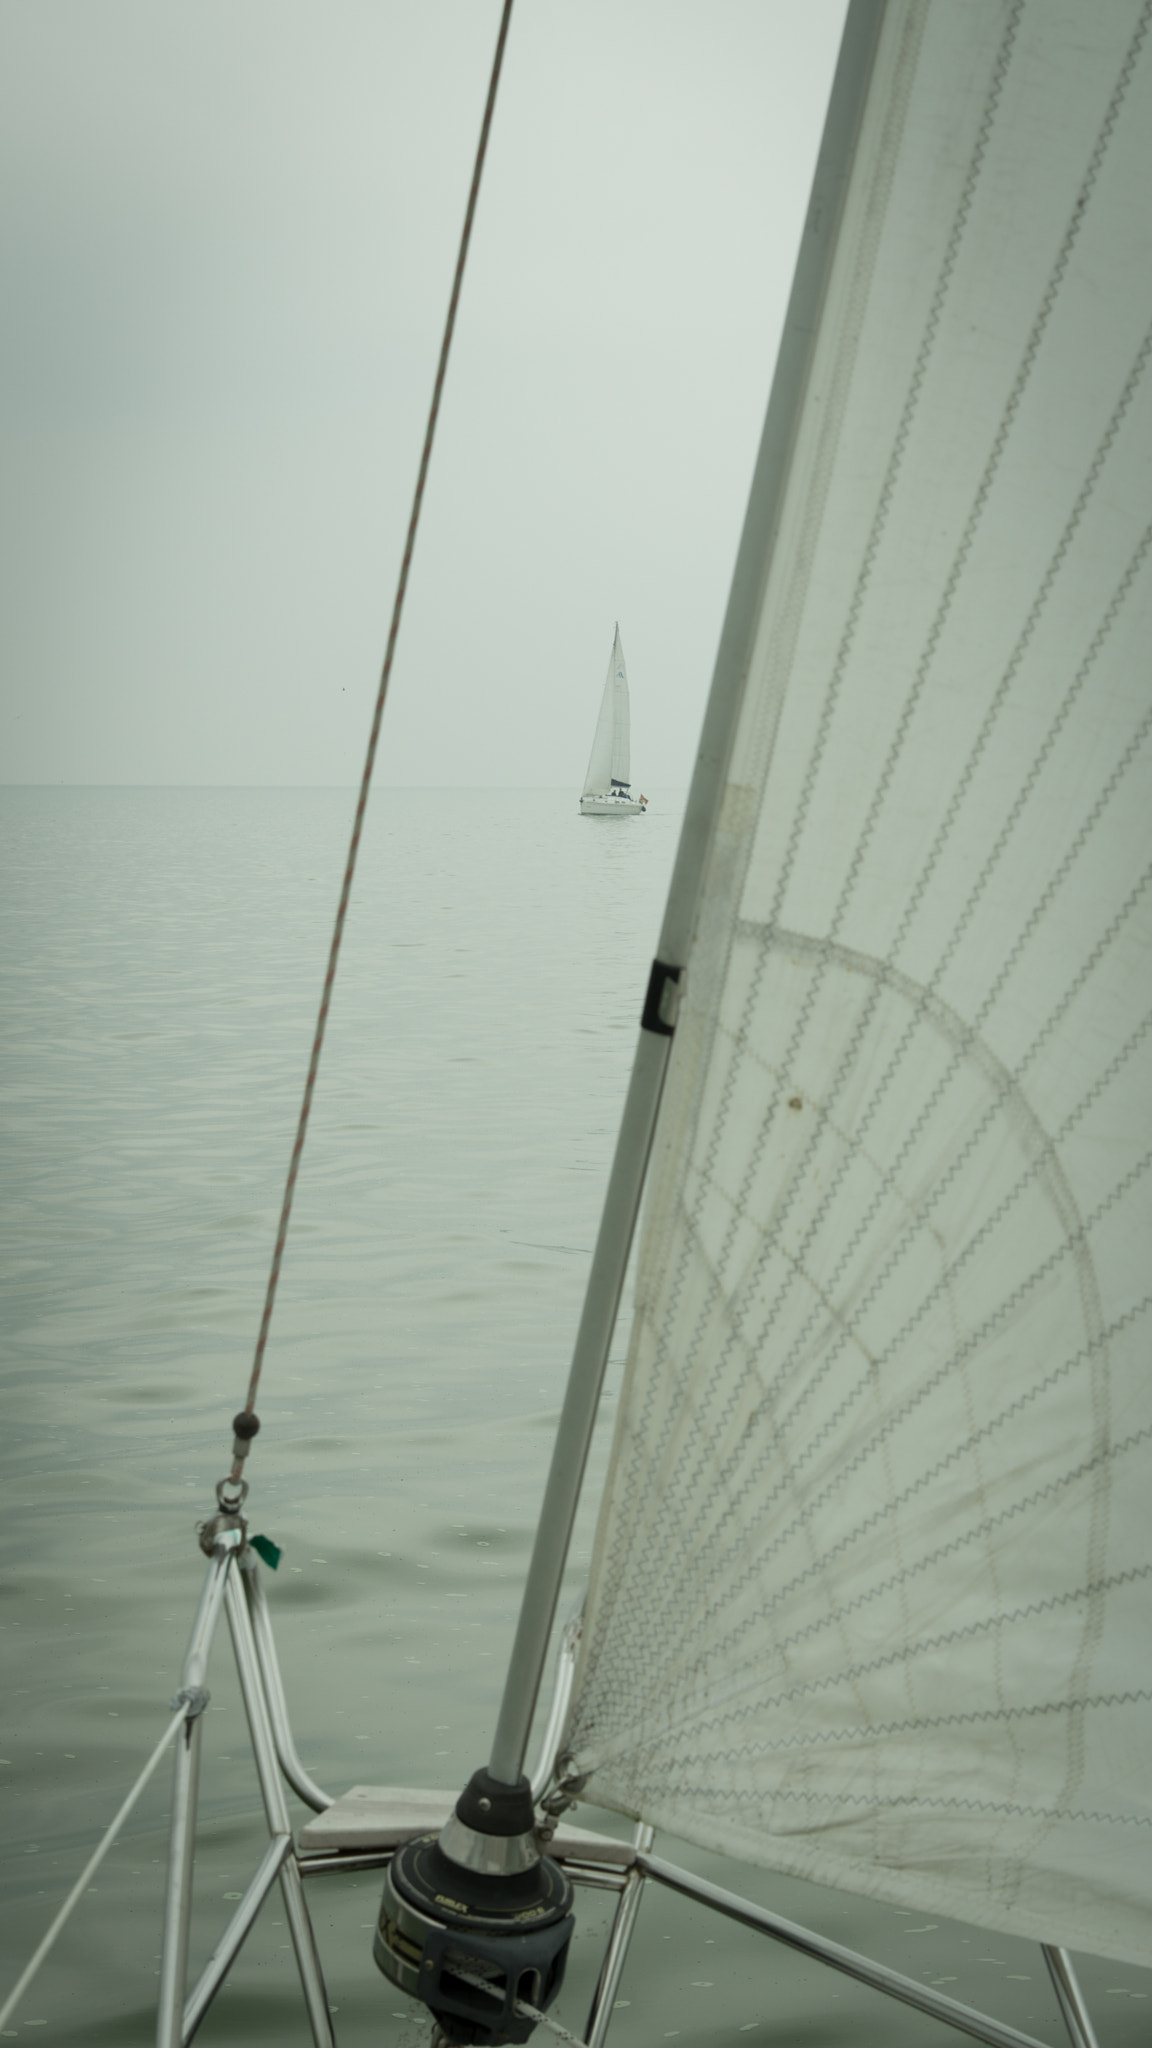 Sony a6000 + Tamron SP 24-70mm F2.8 Di VC USD sample photo. Sailing photography